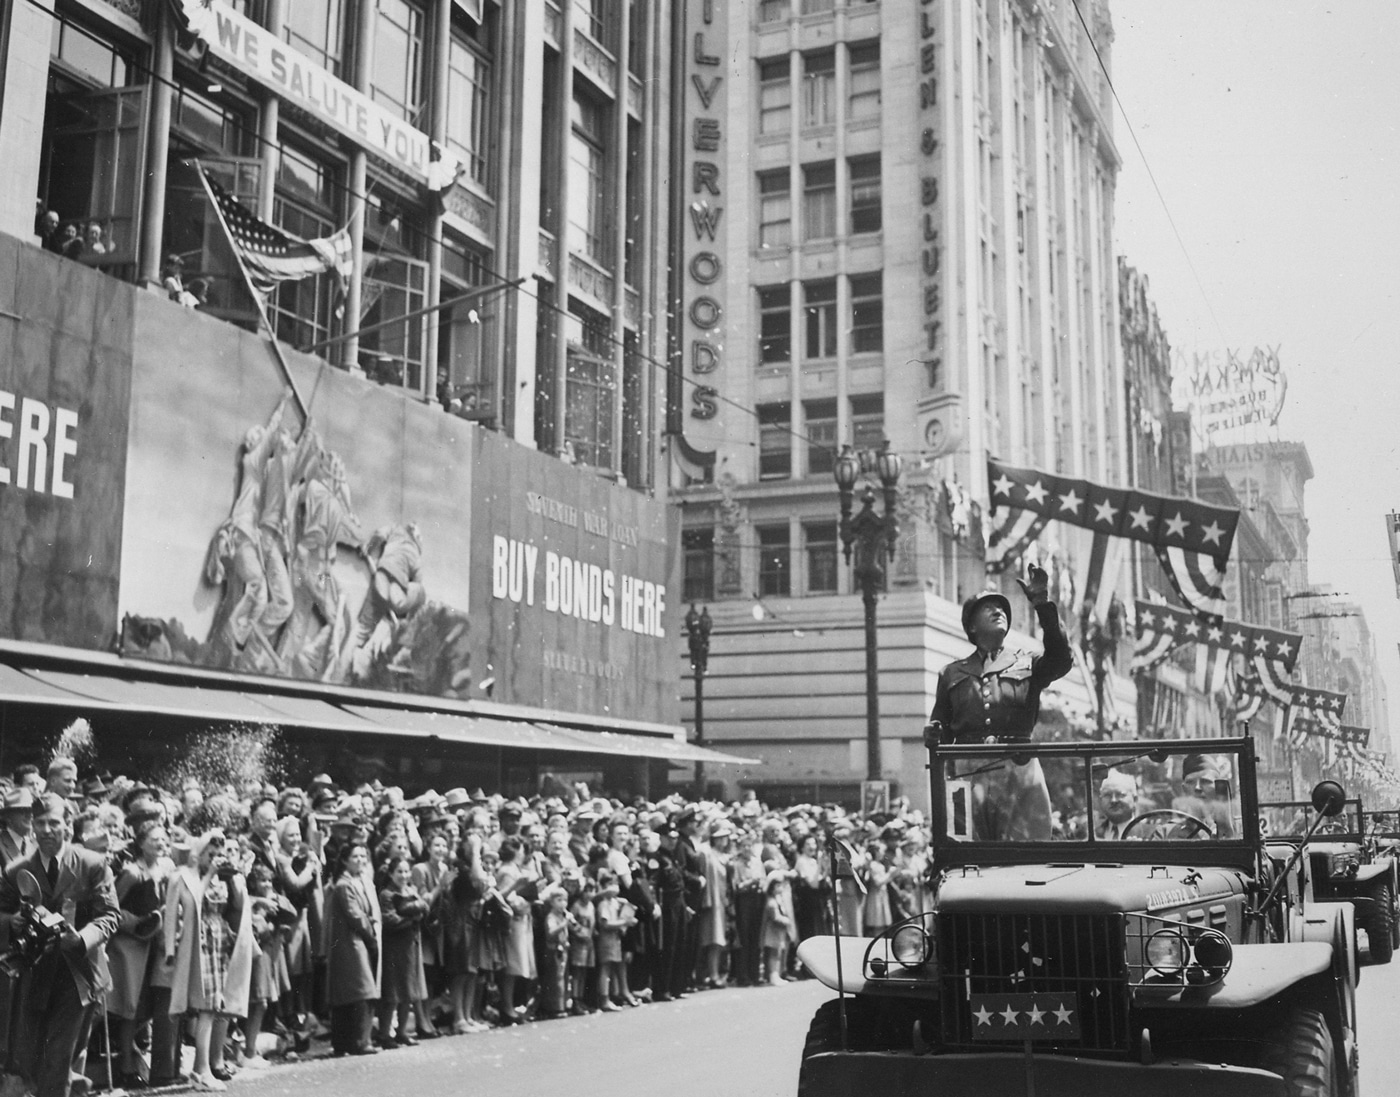 In this photo, we see Gen. Patton waving to a crowd while he rides by in a parade.